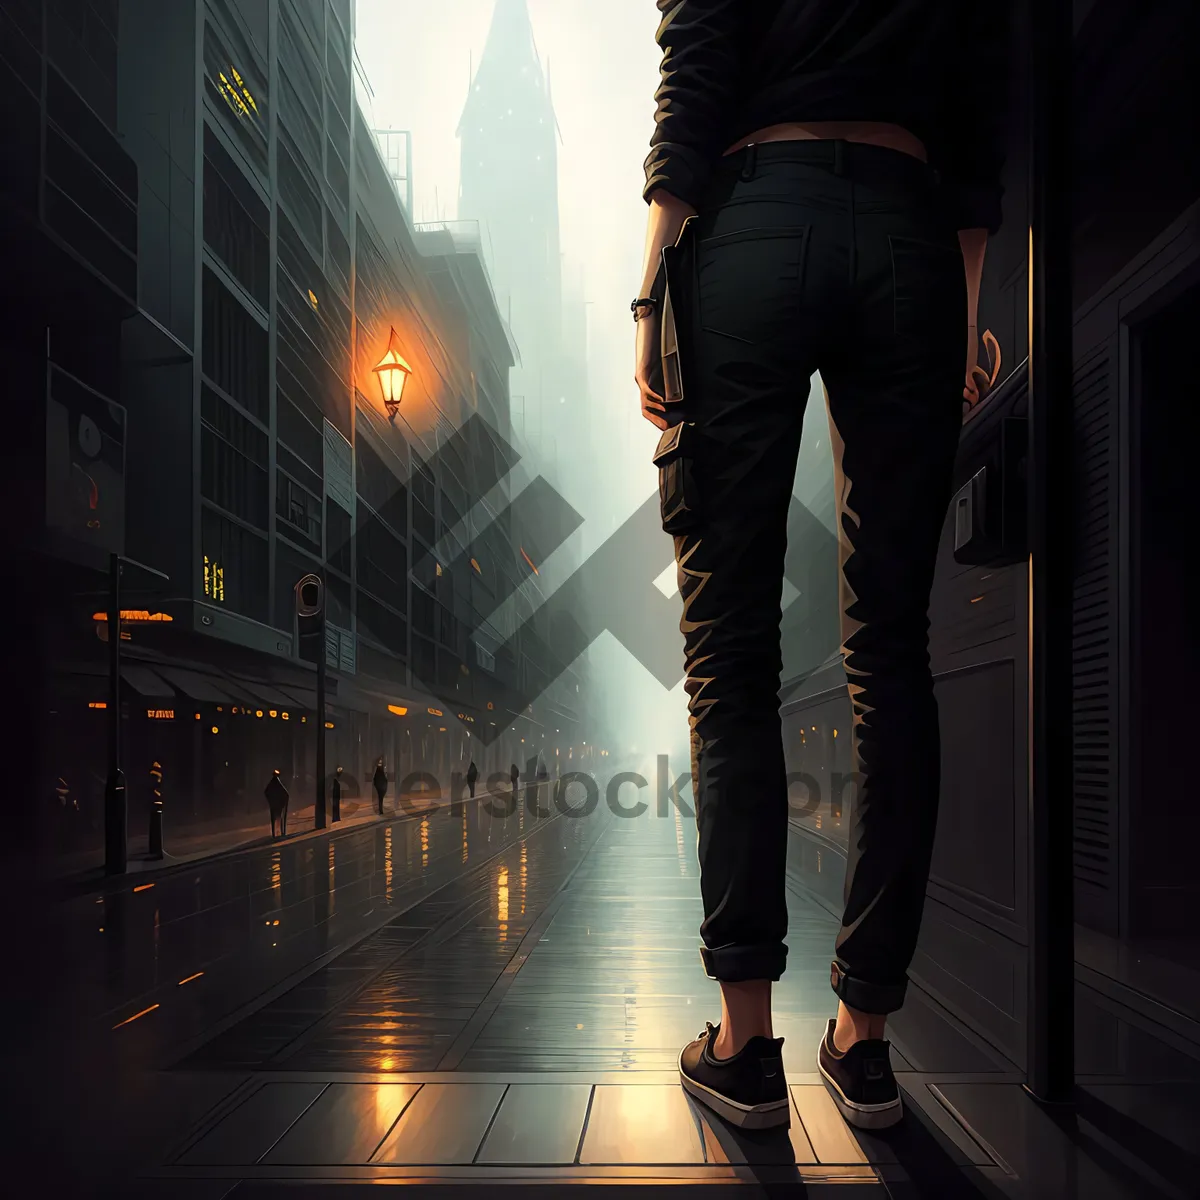 Picture of Urban Man in Jeans on City Street